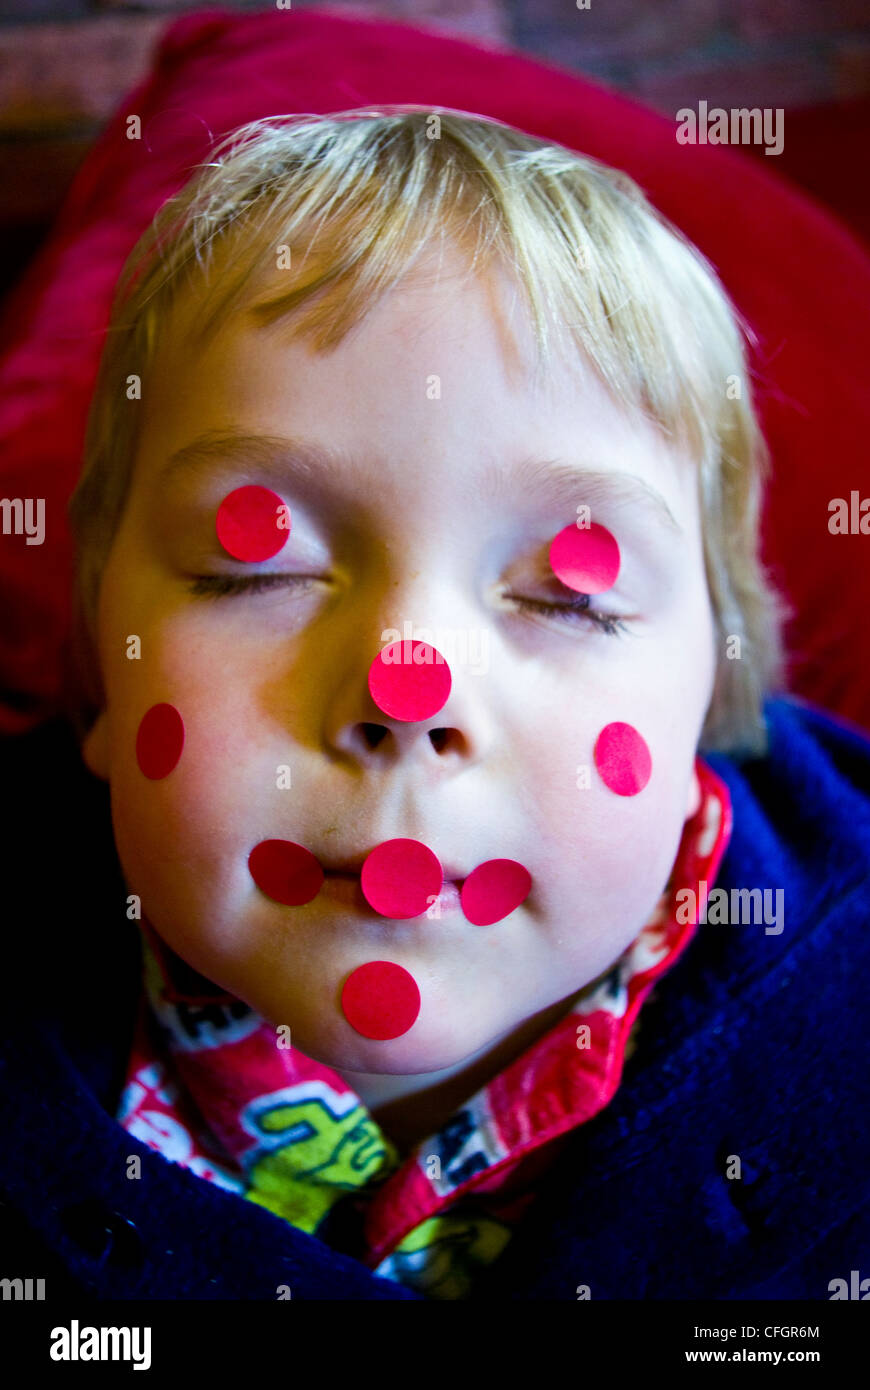 A boy pretending to be asleep with red sticky dots on his face. Stock Photo